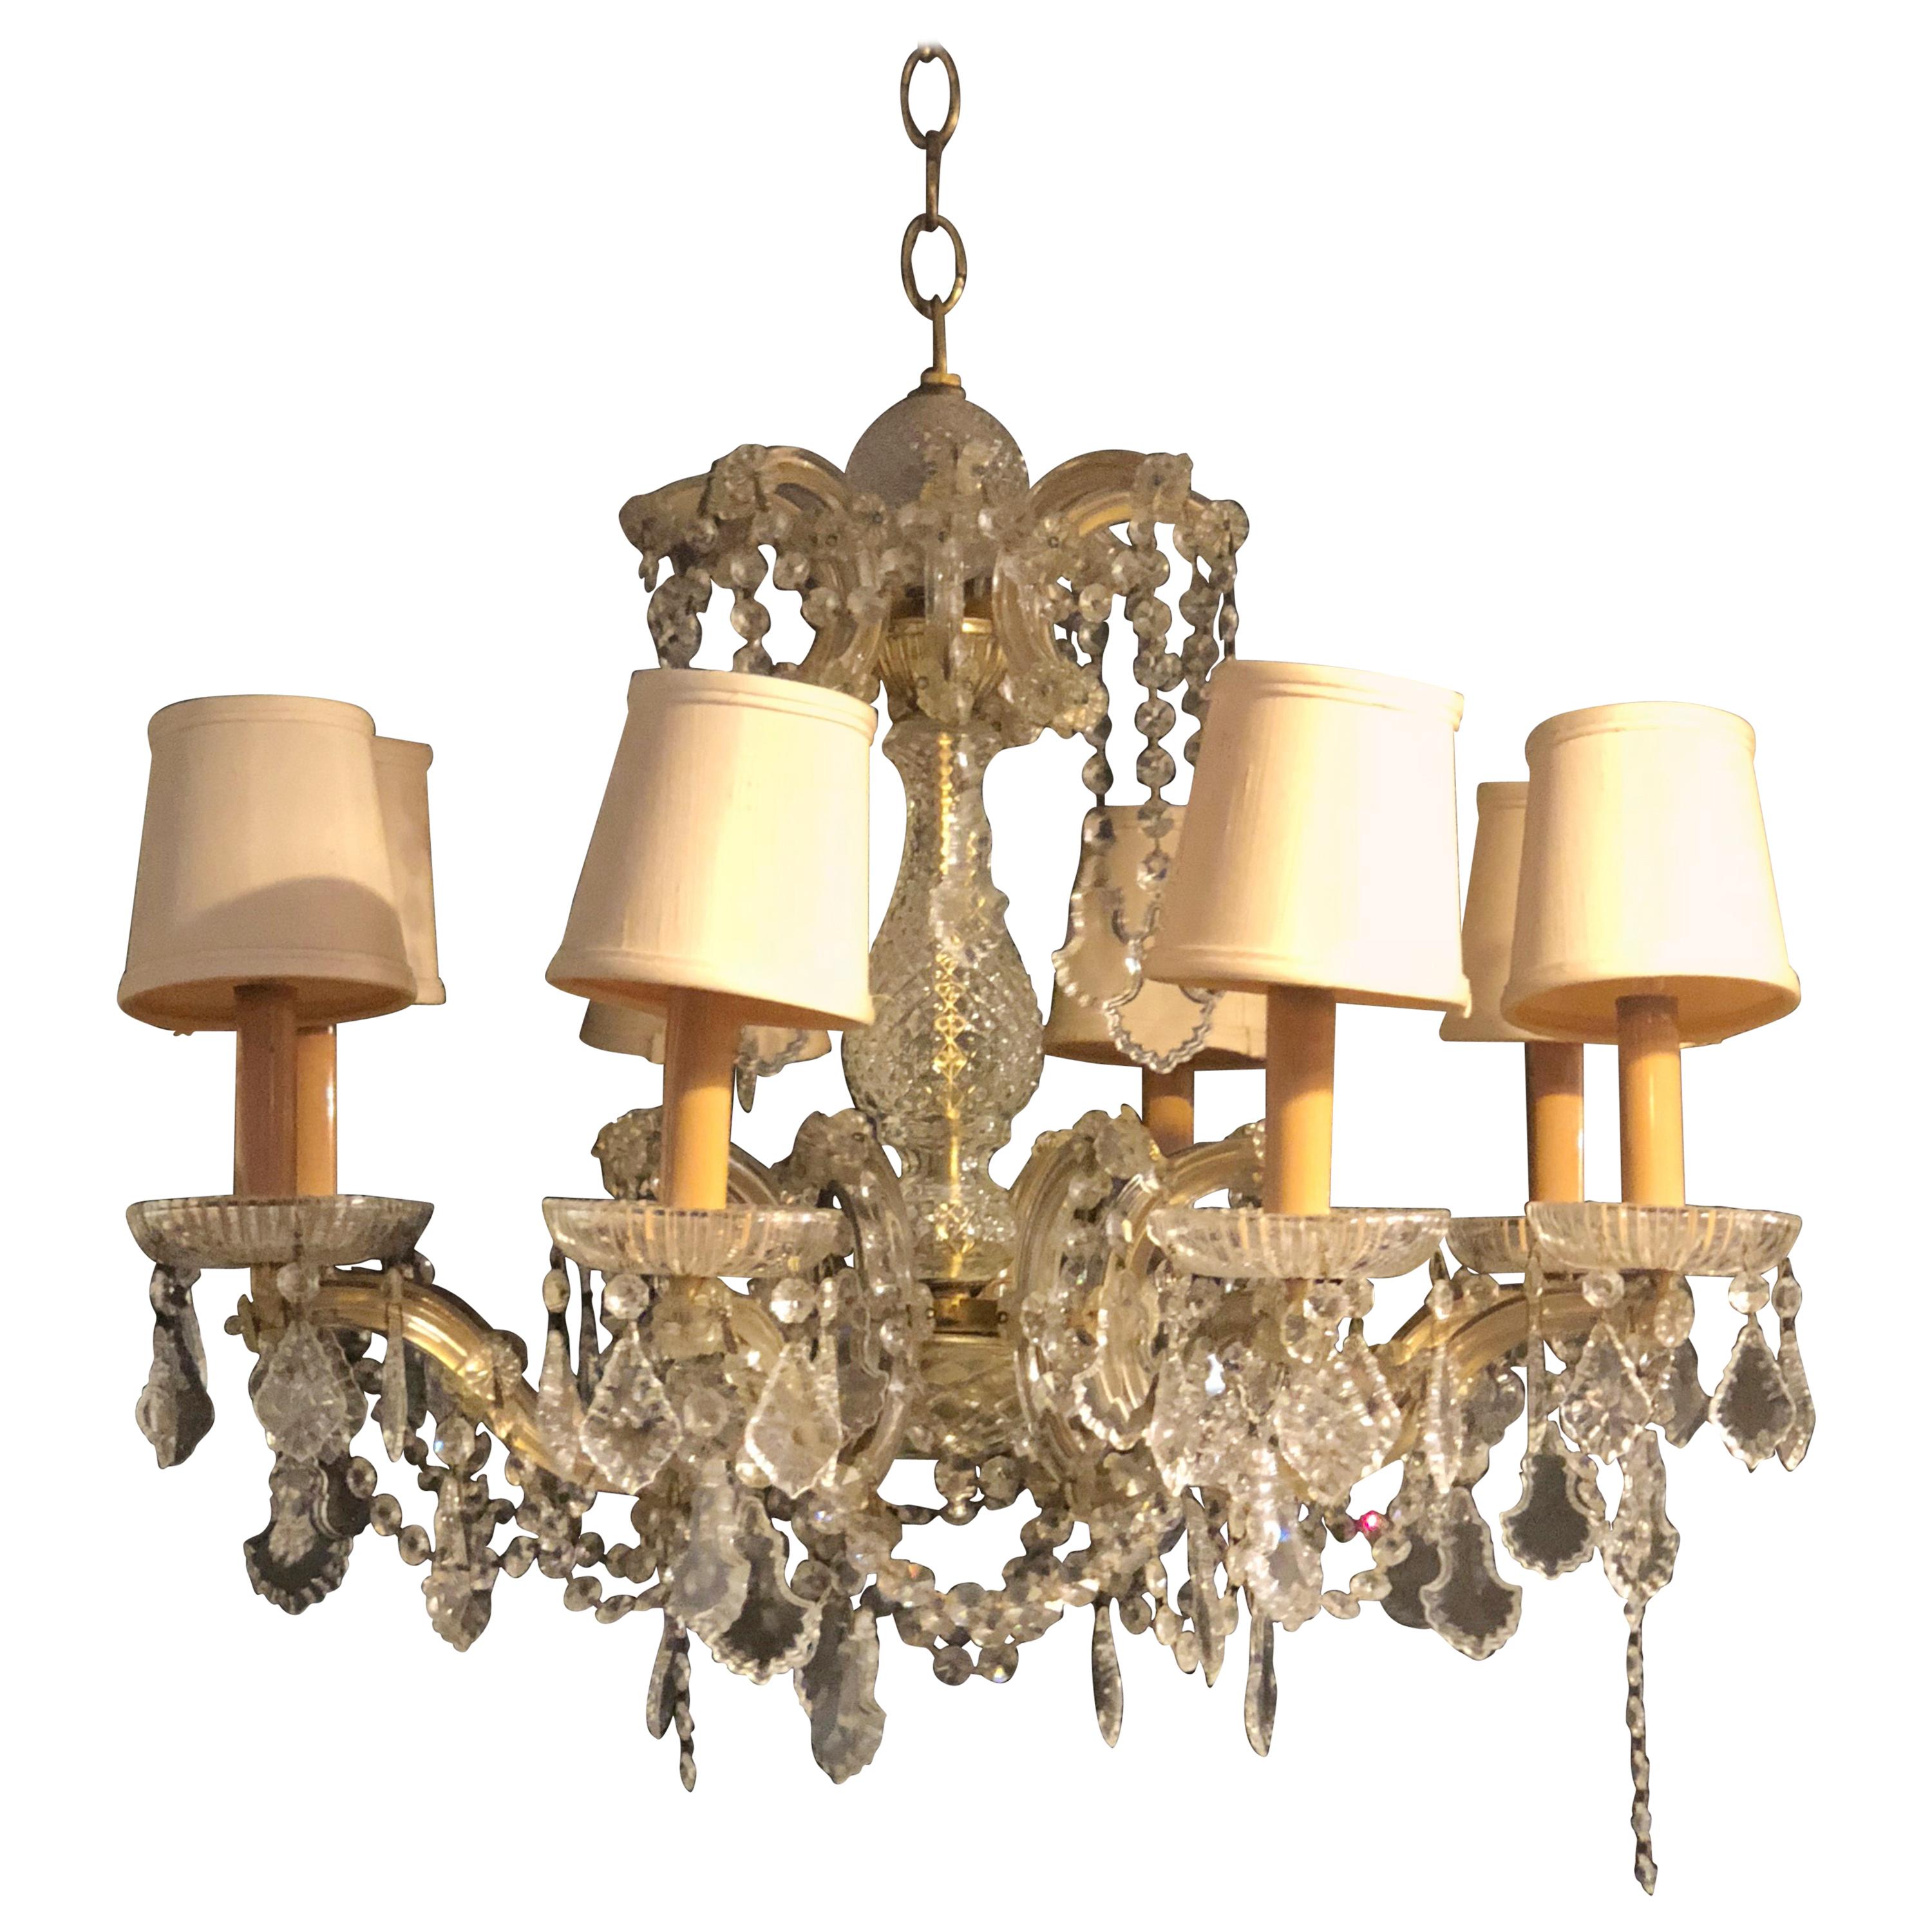 1960s Vintage Crystal Neoclassical Style Chandelier